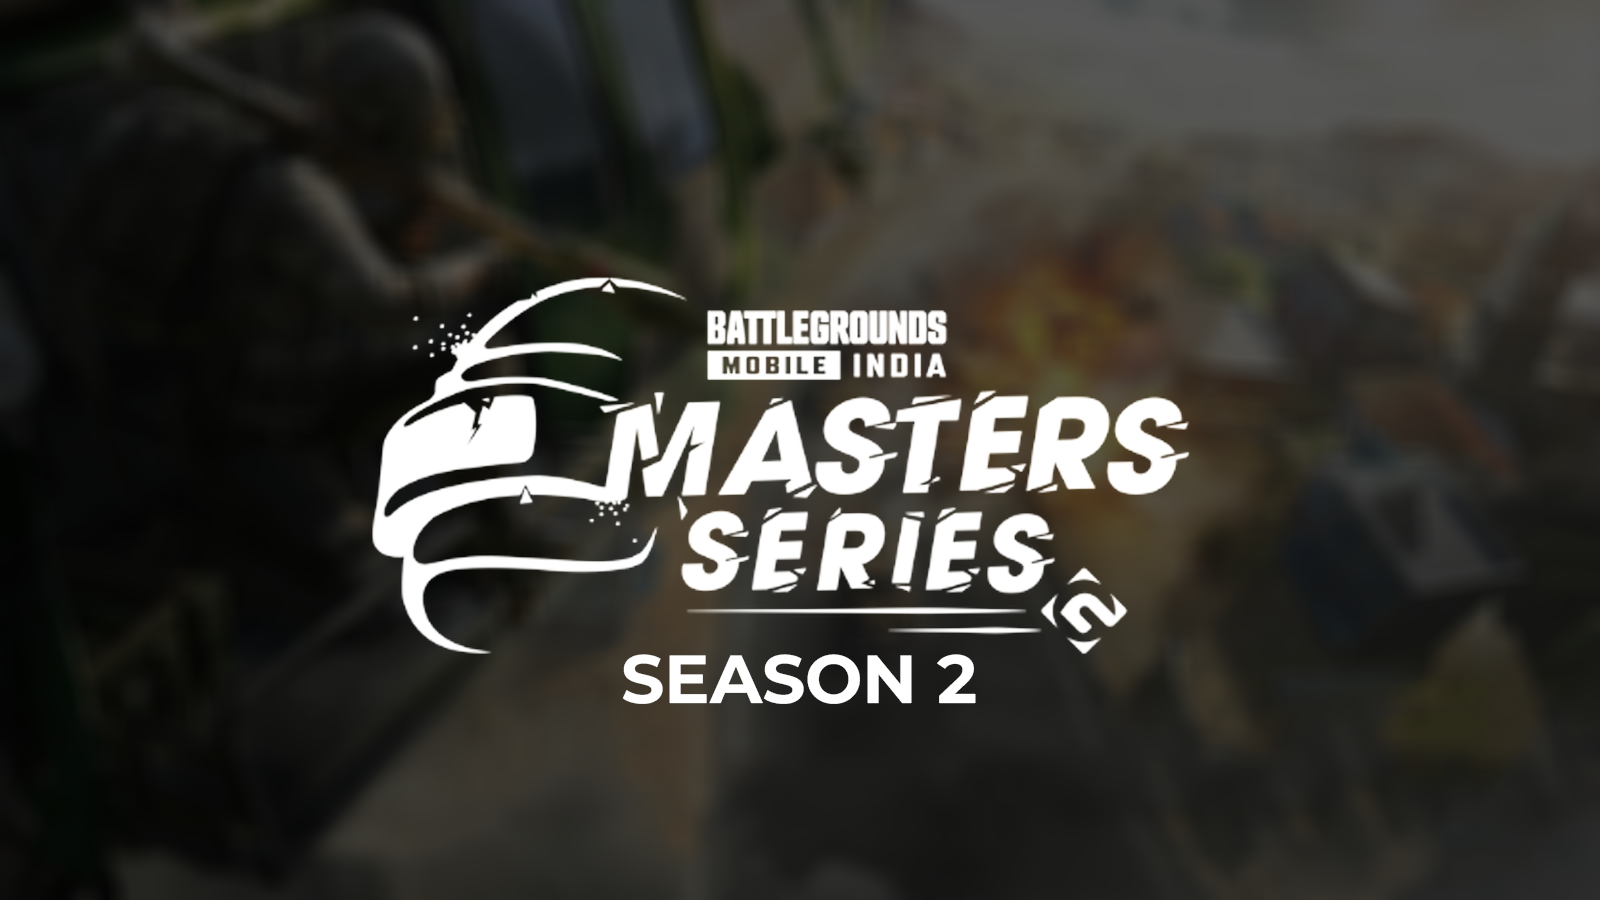 Battlegrounds Mobile India Masters Series Season 2: All You Need To Know